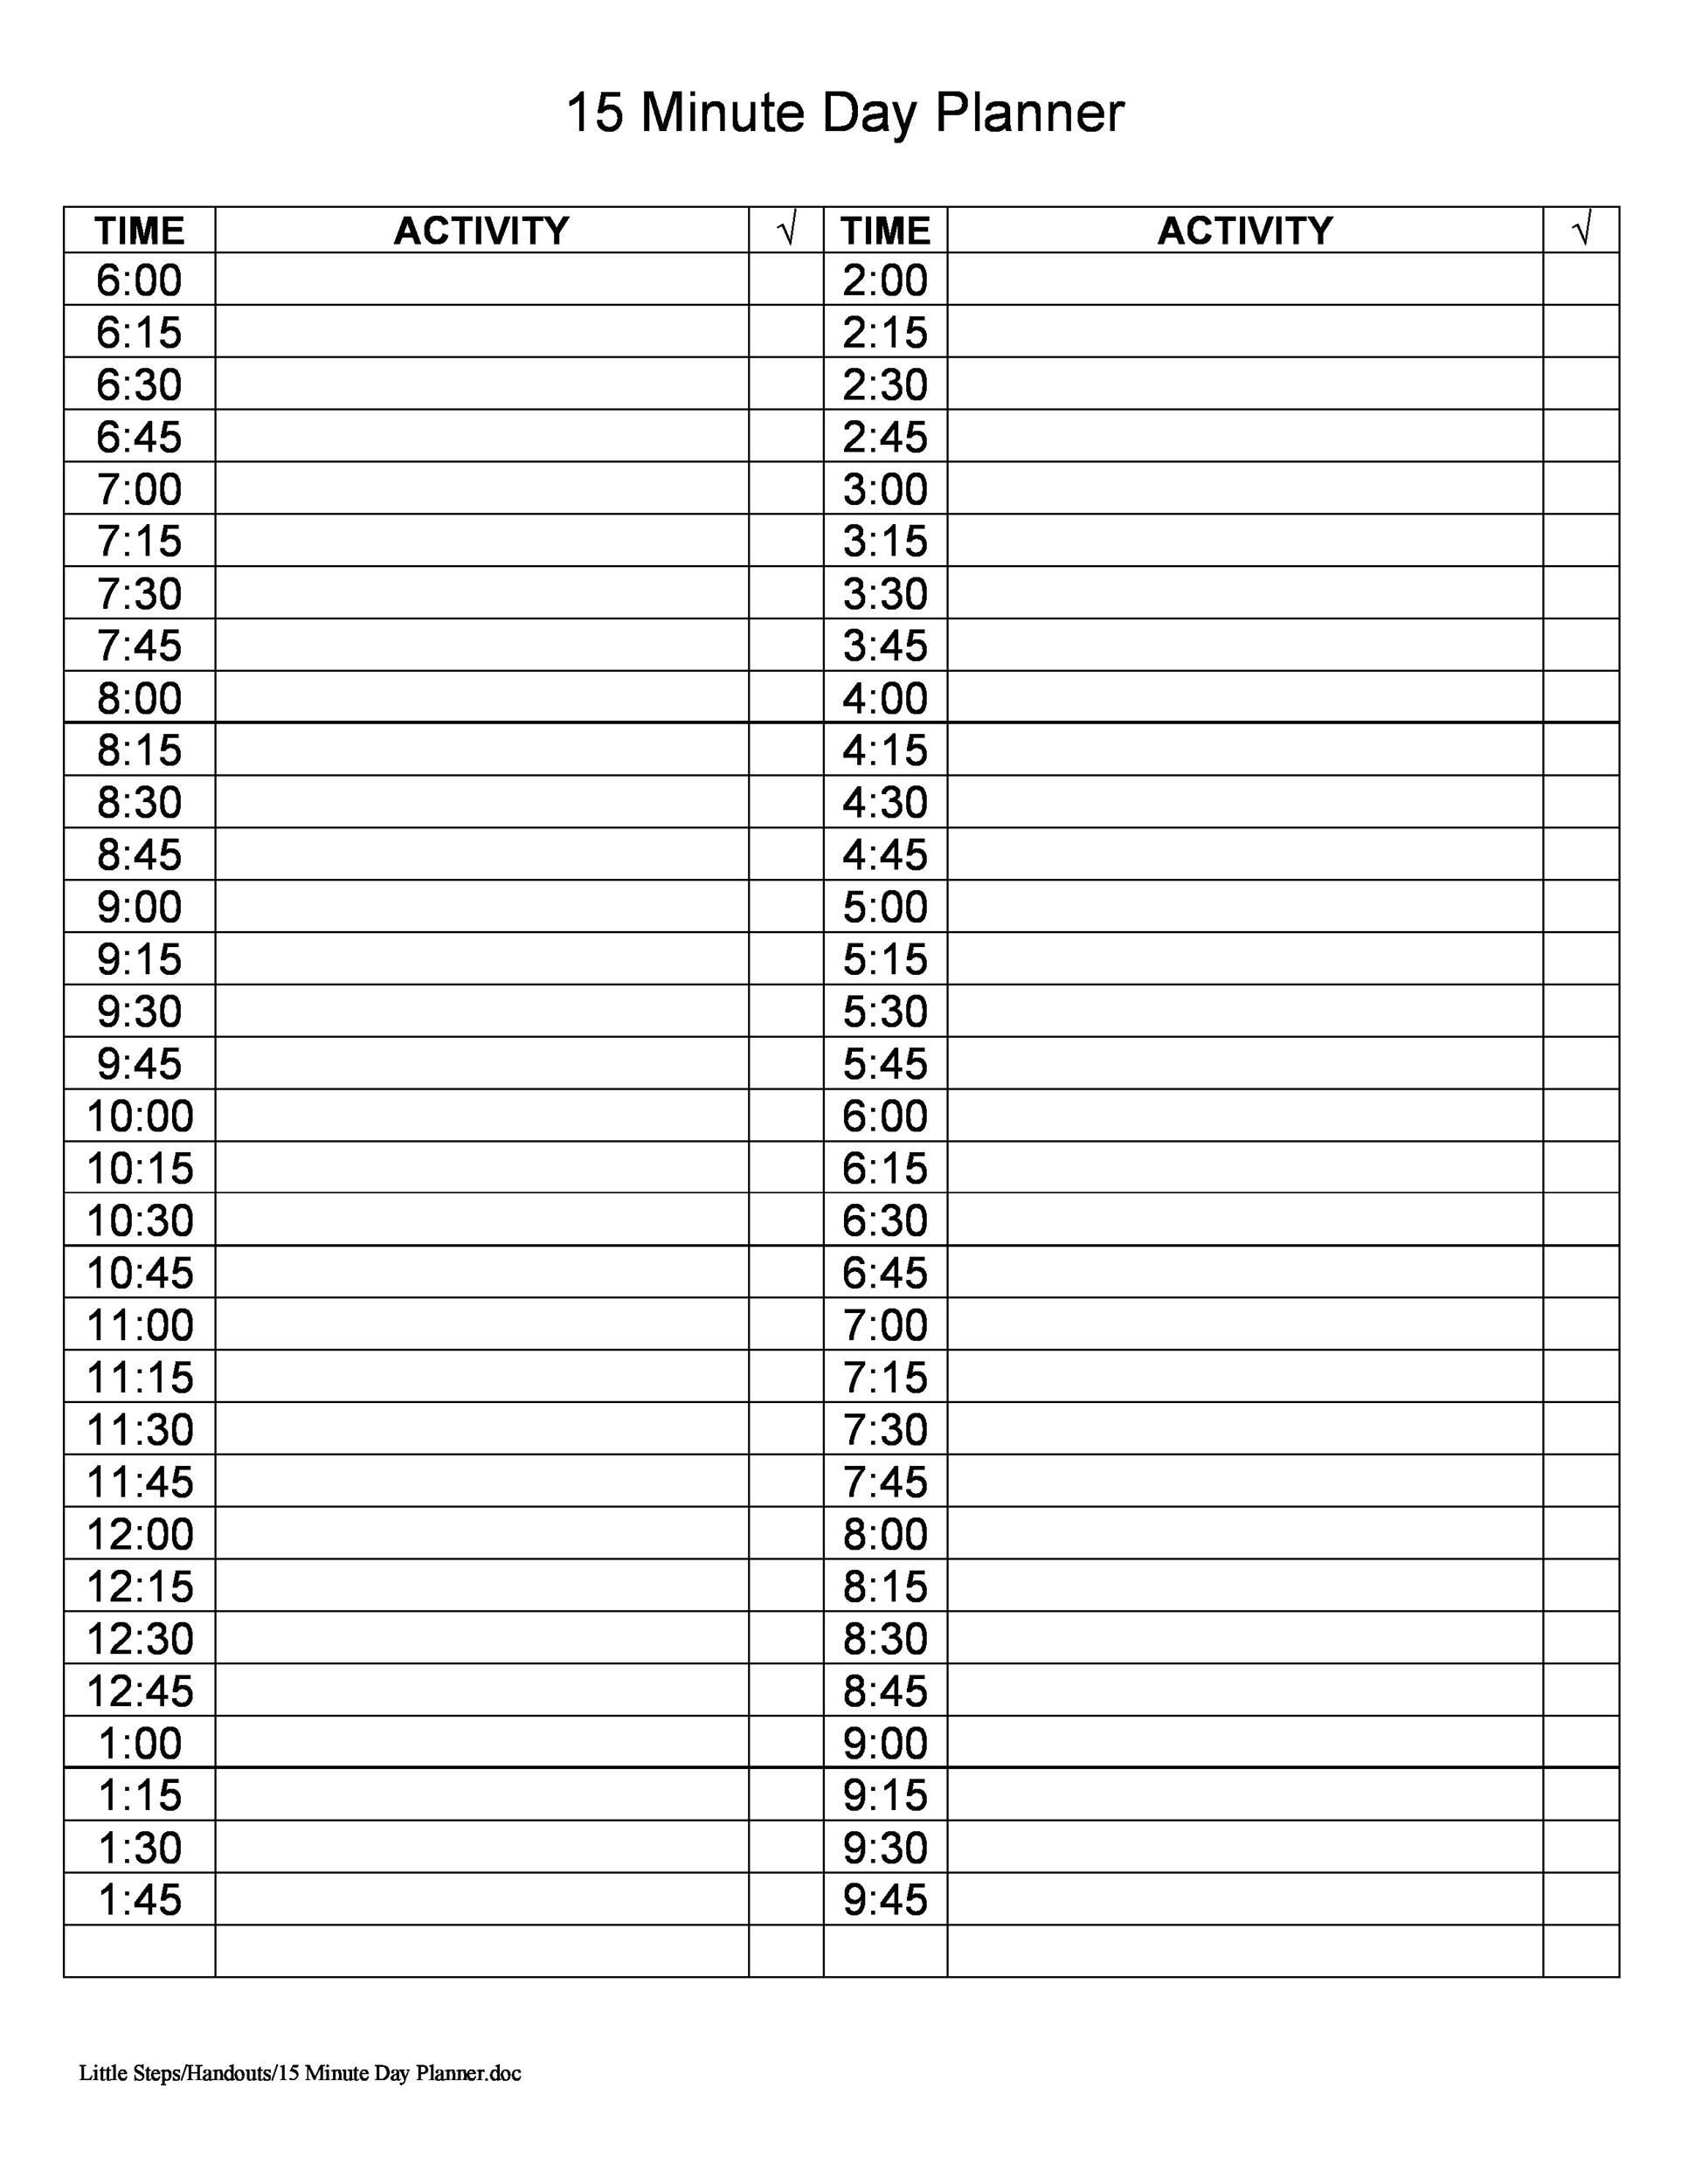 excell weekly calender with 30 minute intervals example